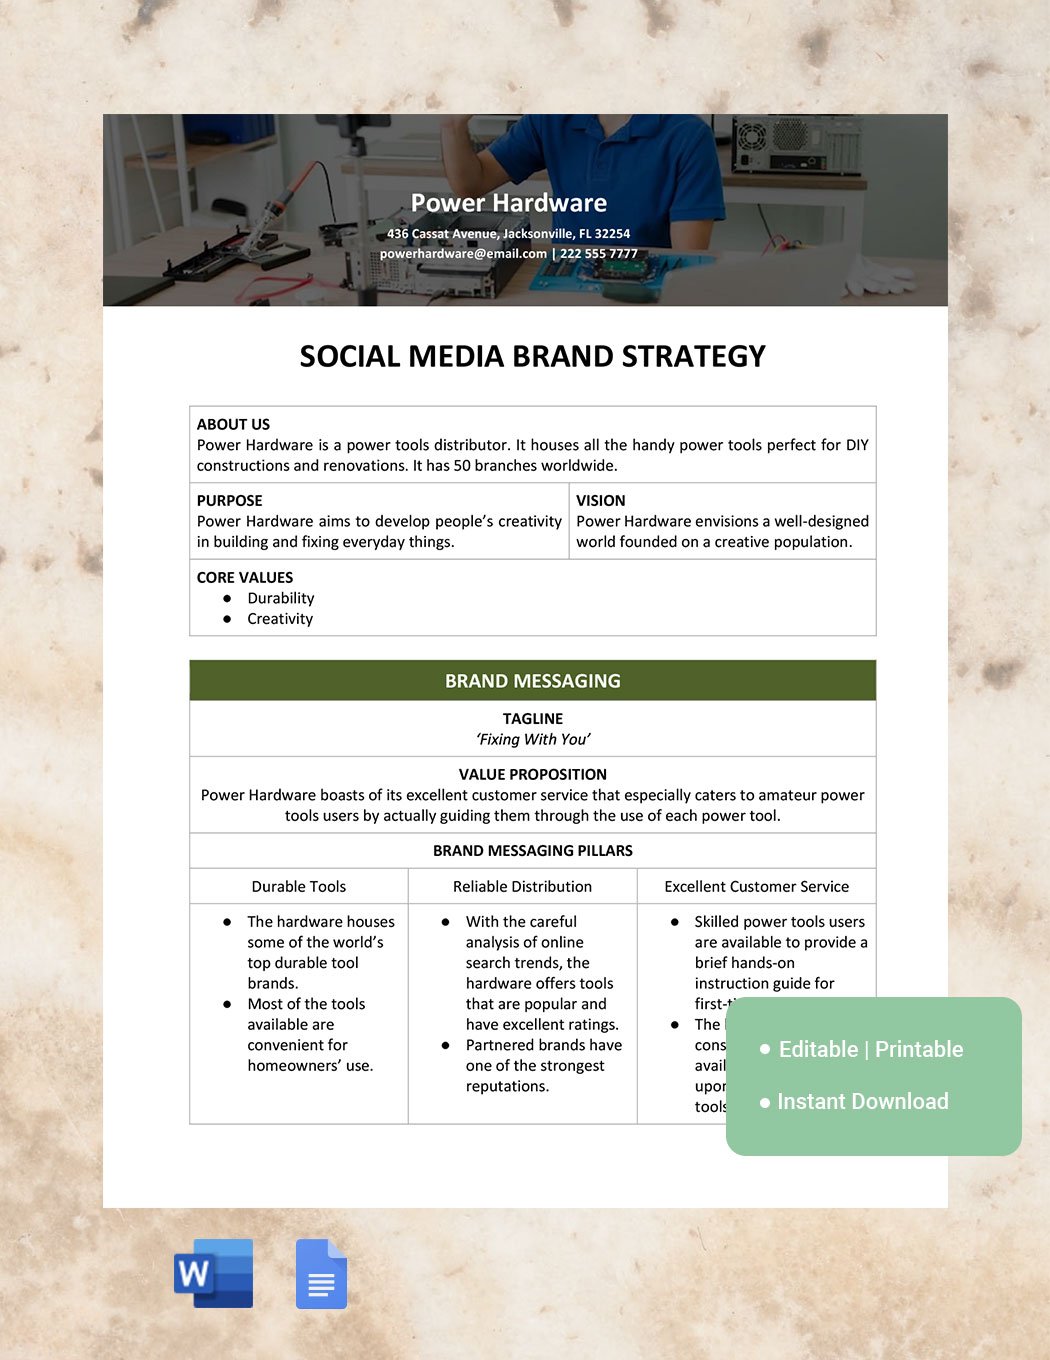 Social Media Brand Strategy Template in Word, Google Docs